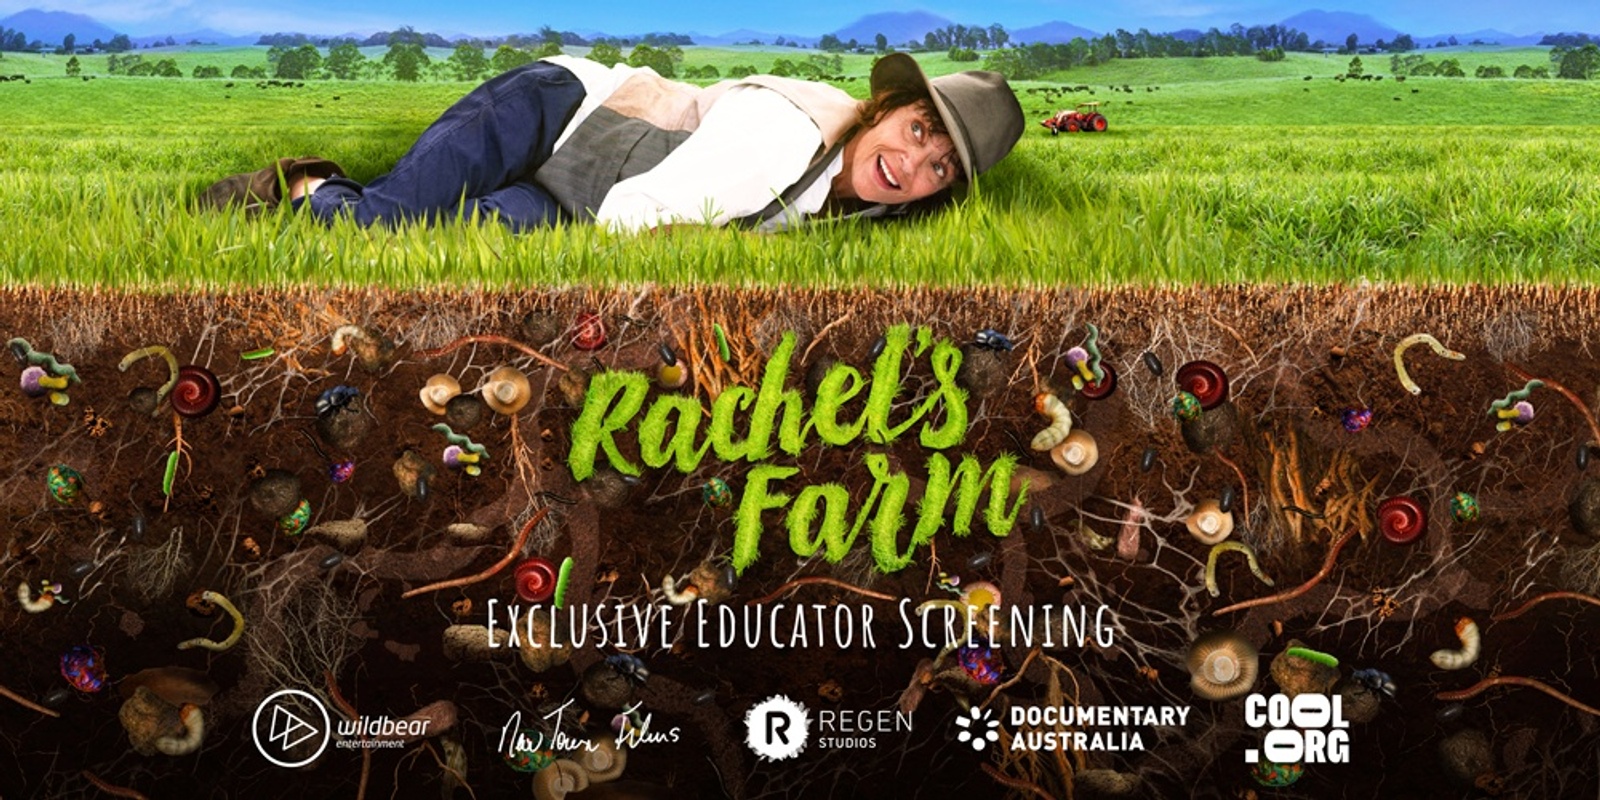 Banner image for Free Educator Screening and Q&A of 'Rachel's Farm' 9 October 2023